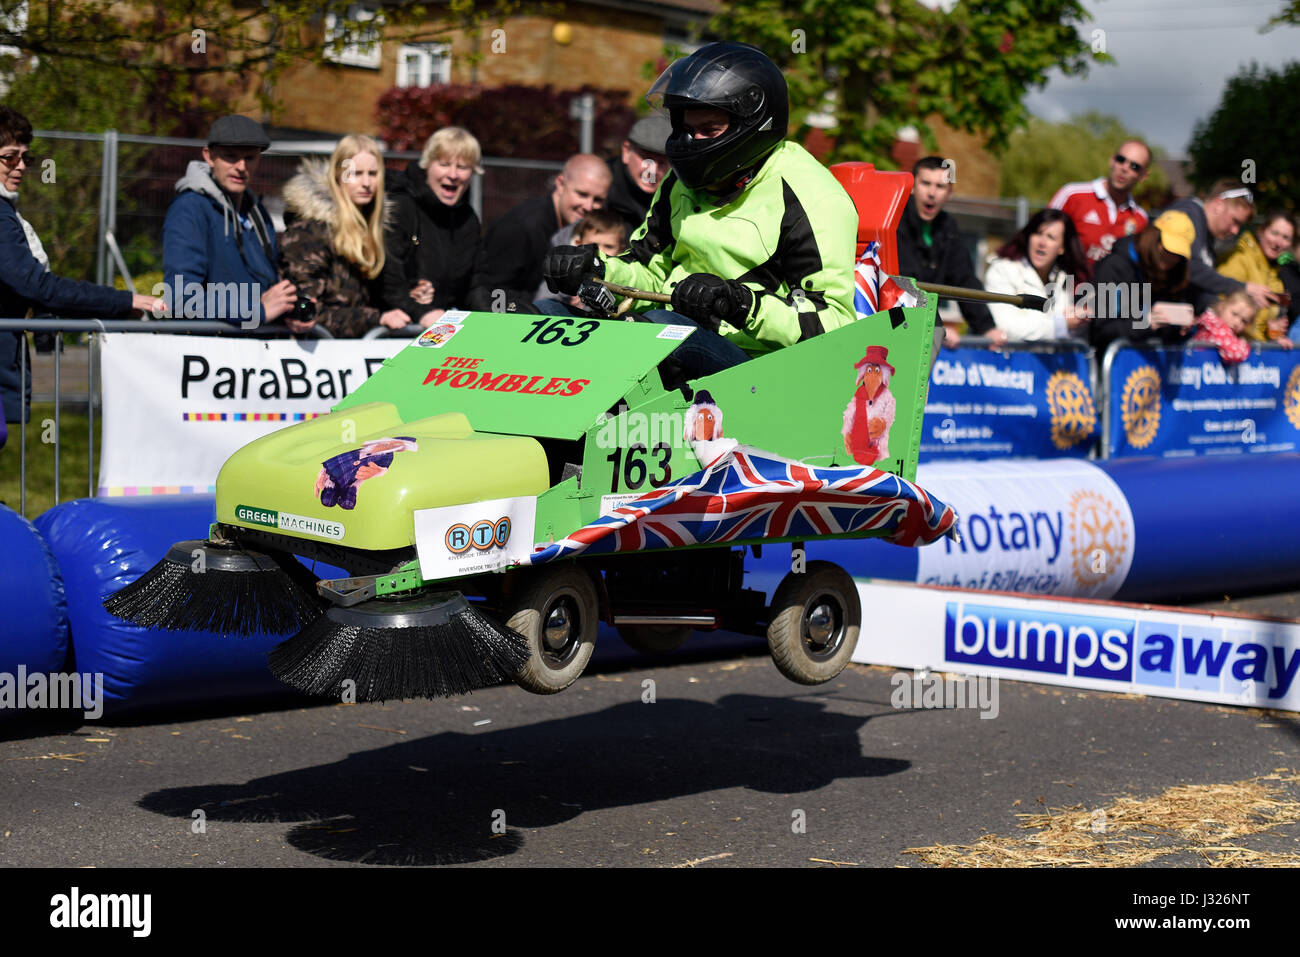 Soapbox, or soap box, derby carts leap over the jump ramps during an event in Billericay, Essex, UK. Home made race vehicles Stock Photo